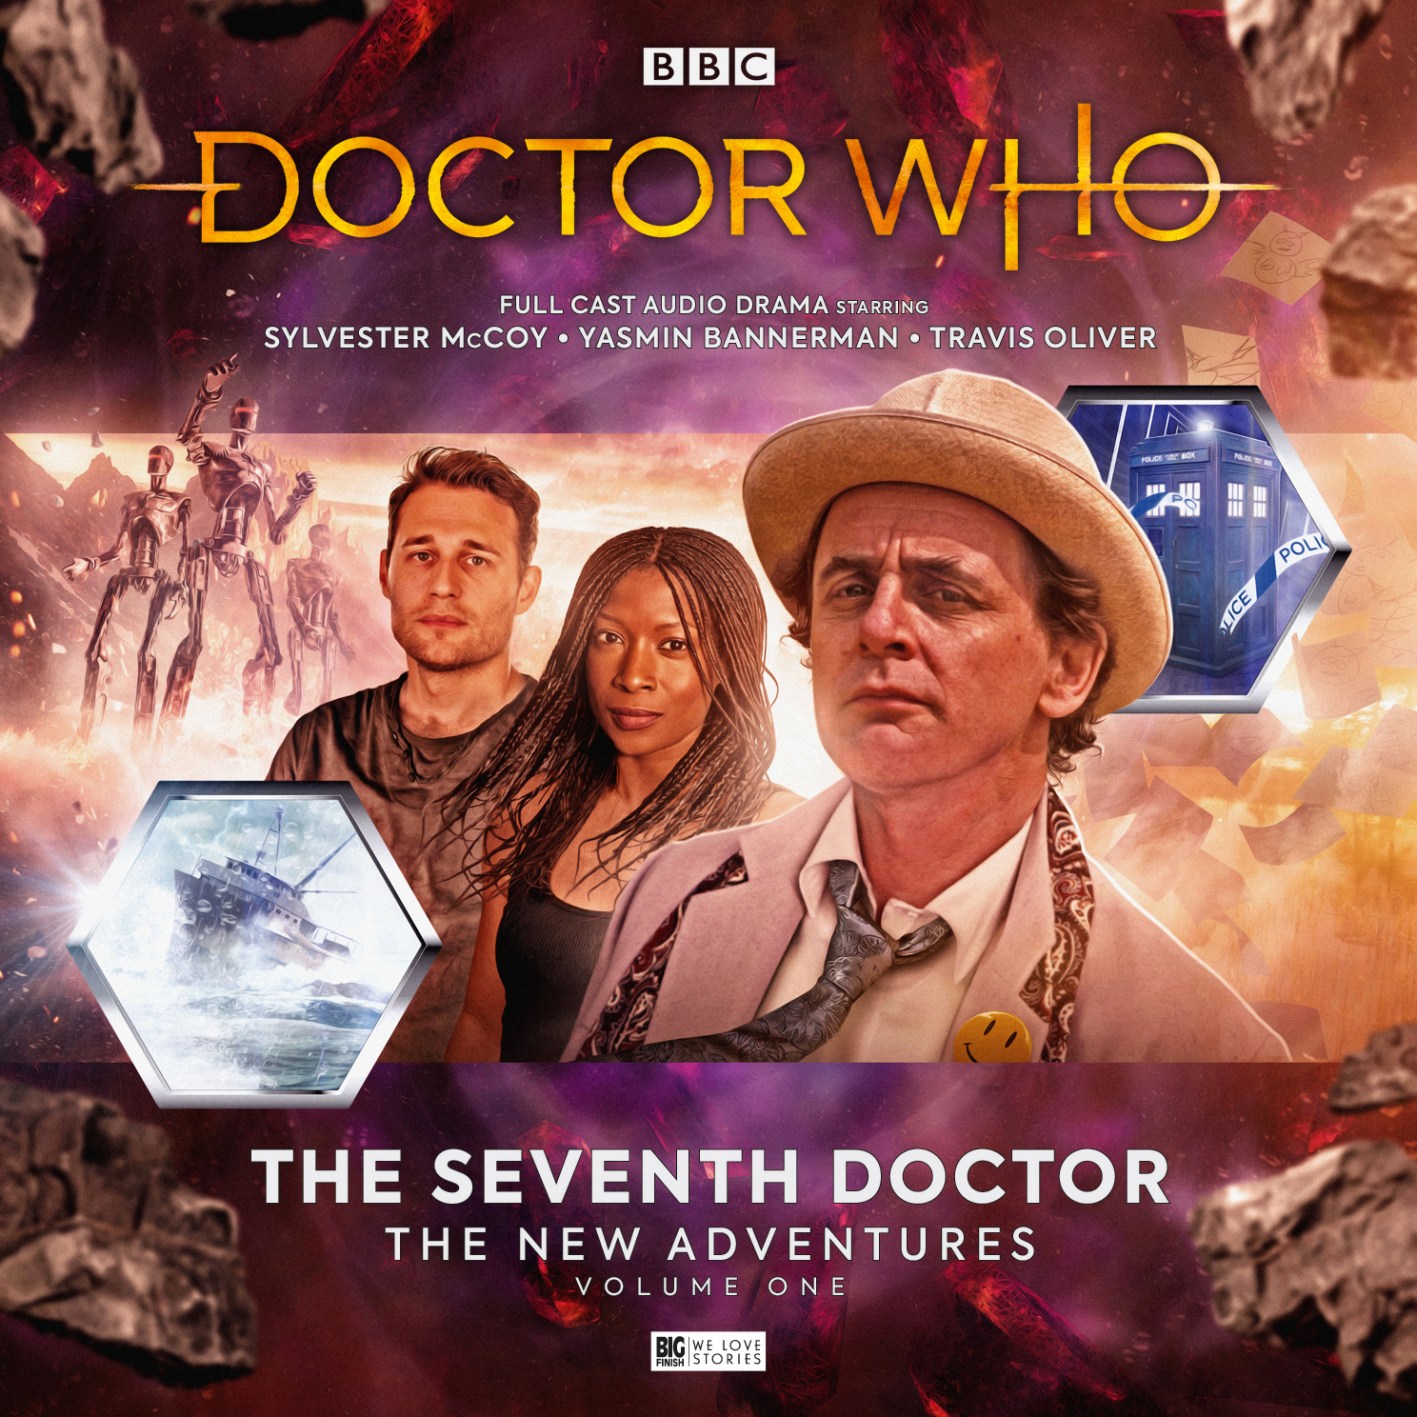 Doctor Who: The Seventh Doctor New Adventures Volume 1 review